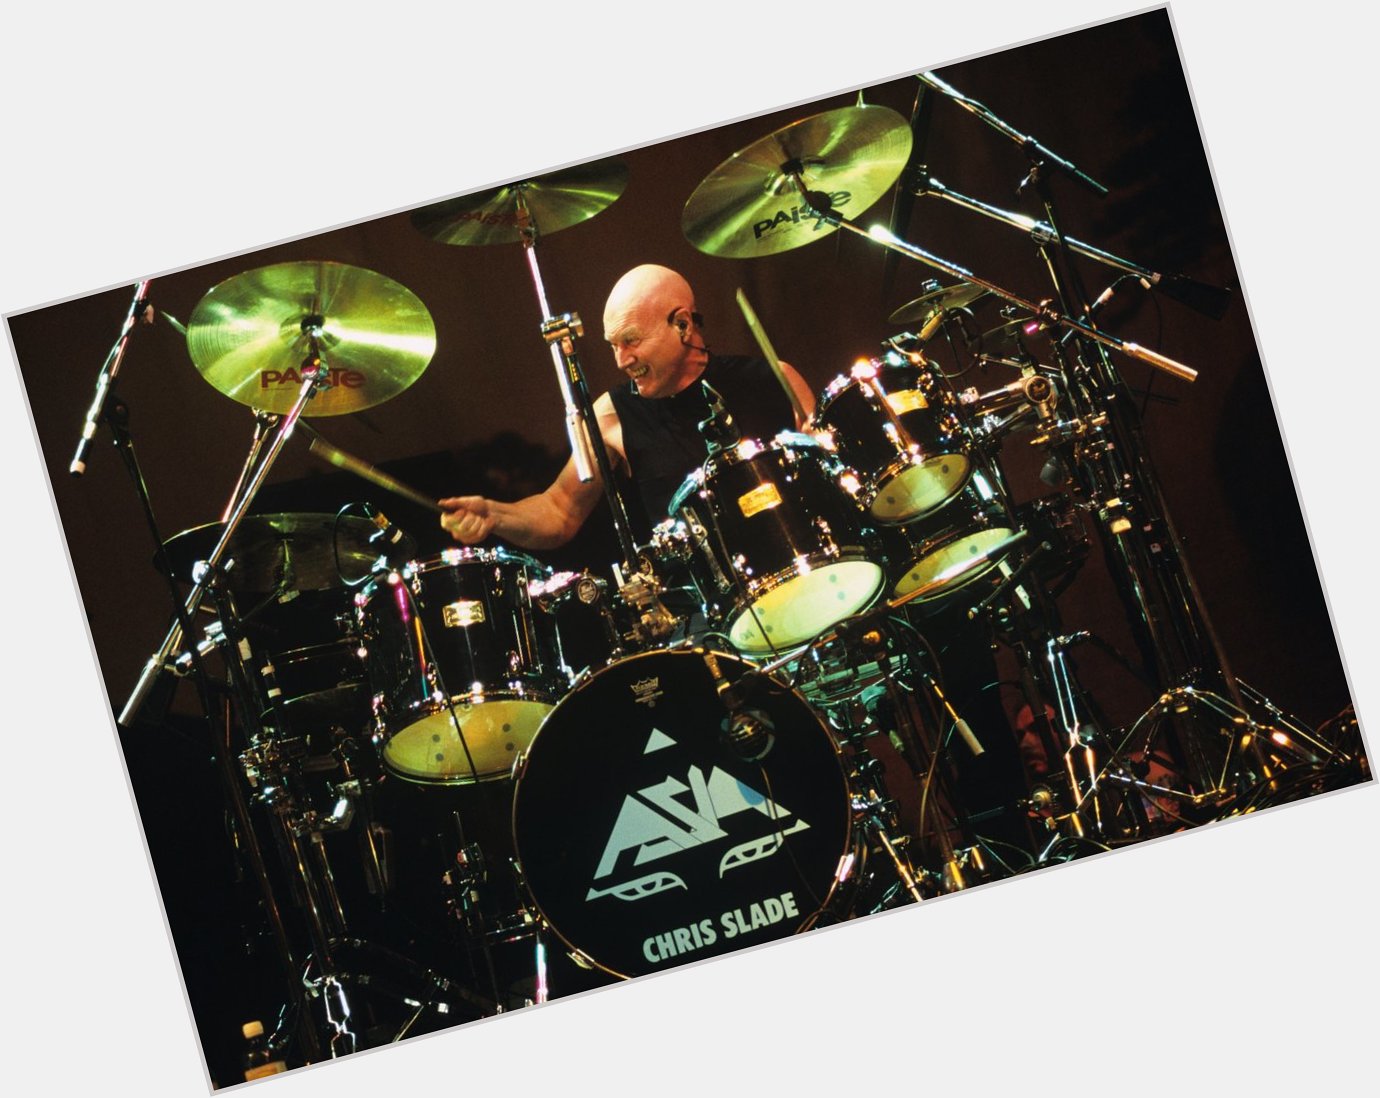 Please join us here at in wishing the one and only Chris Slade a very Happy 74th Birthday today  